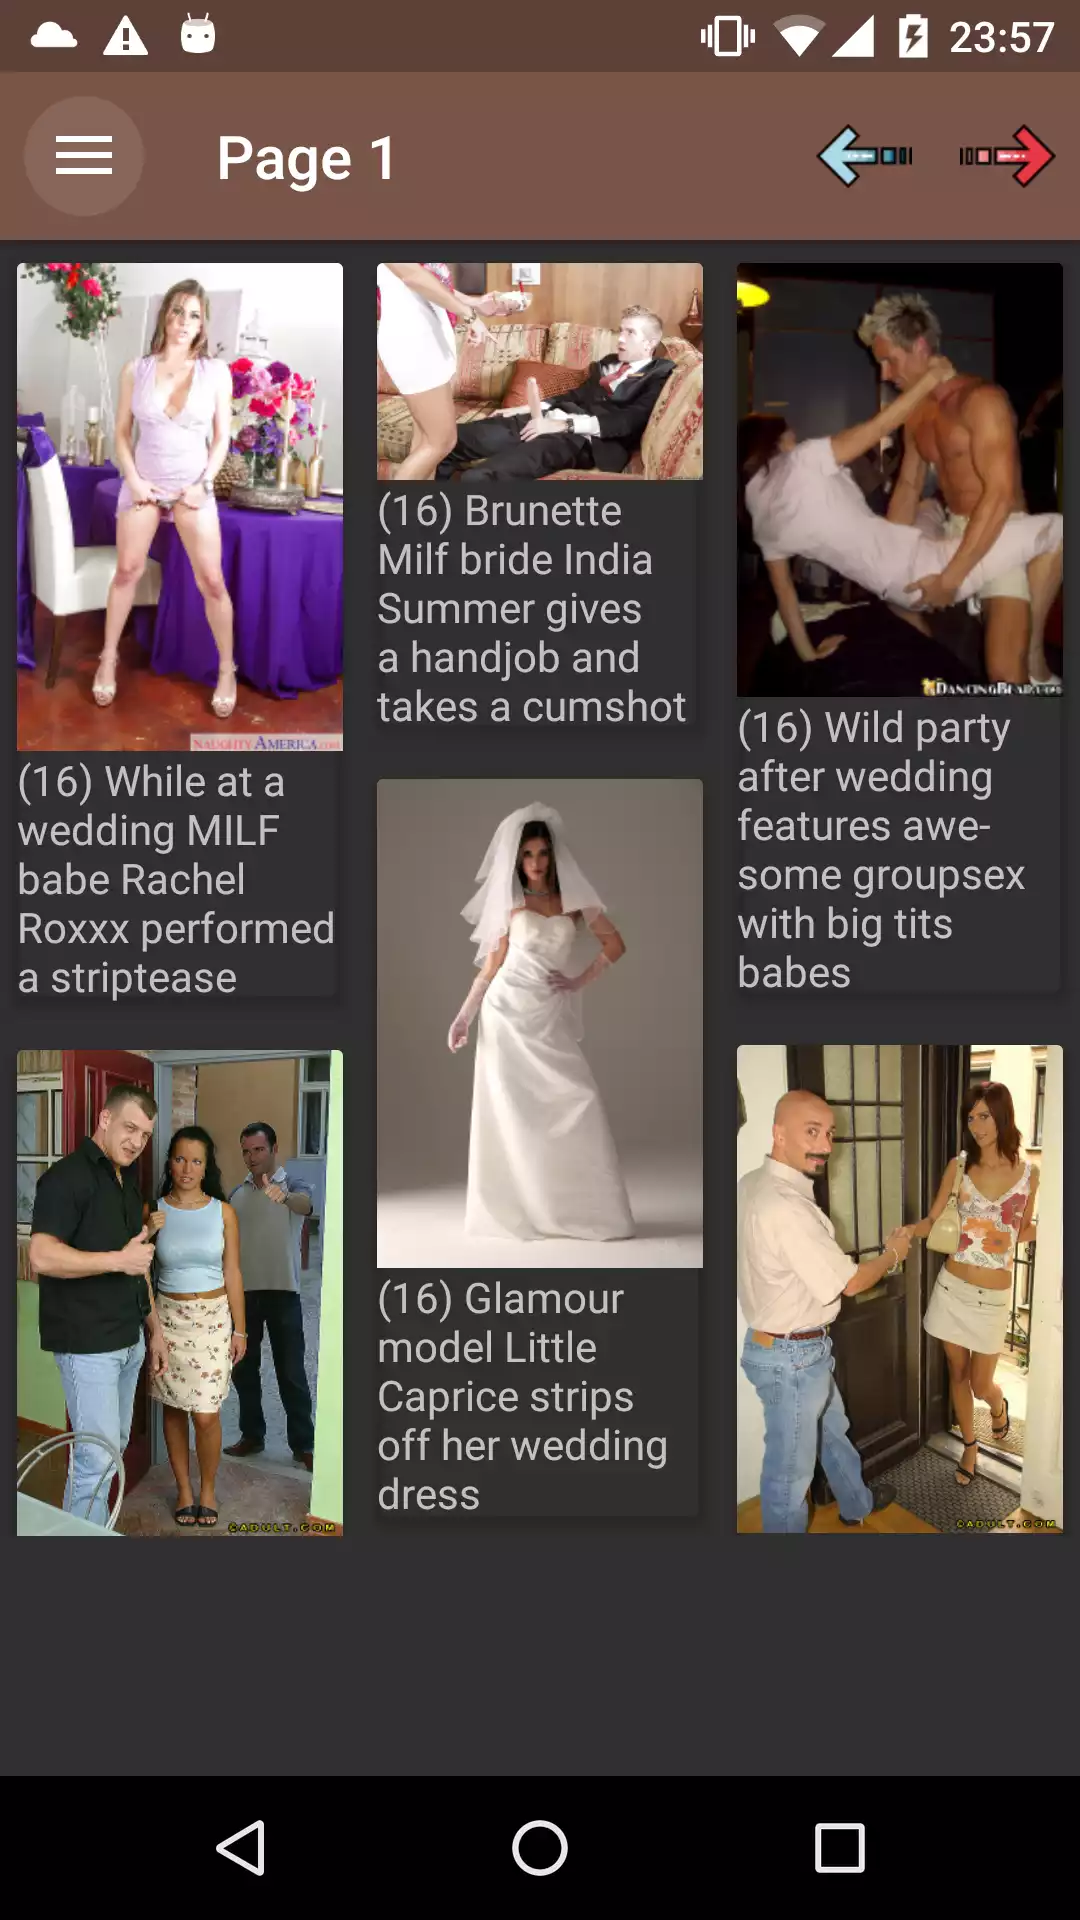 Wedding Galleries hentei,app,apps,photo,pegging,hentai,photos,porn,sexy,new,for,wallpaper,pron,editor,android,apk,images,application,adult,galleries,pictures,best